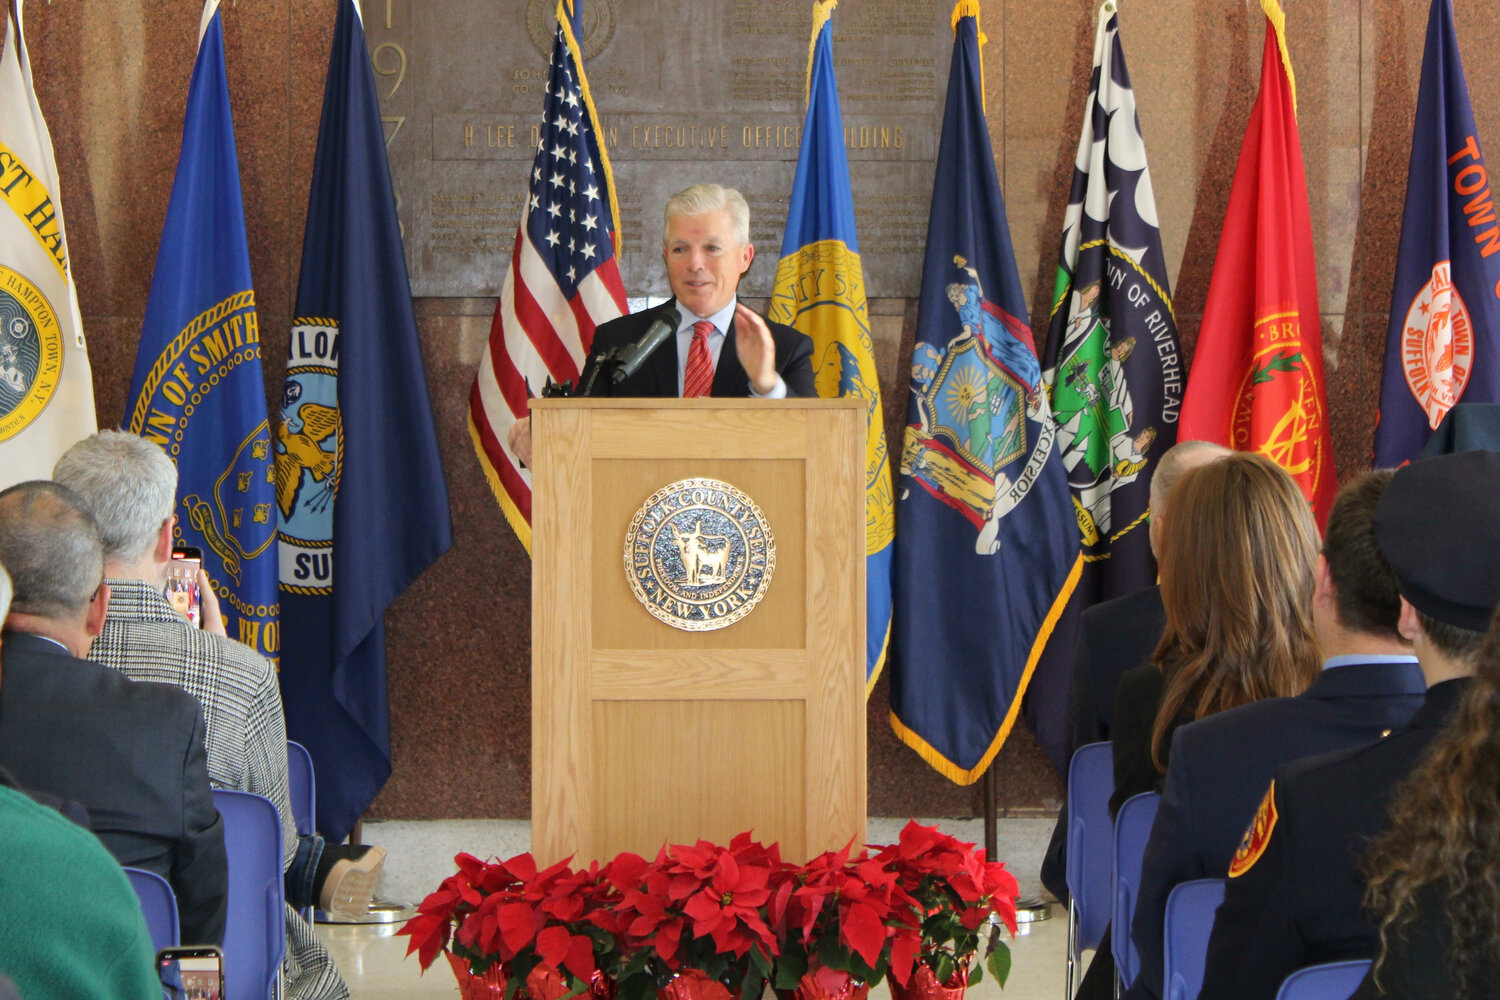 Suffolk County executive Steve Bellone gives his farewell address. He shared his administration’s accomplishments and thanked those who have supported him throughout his time as county executive.